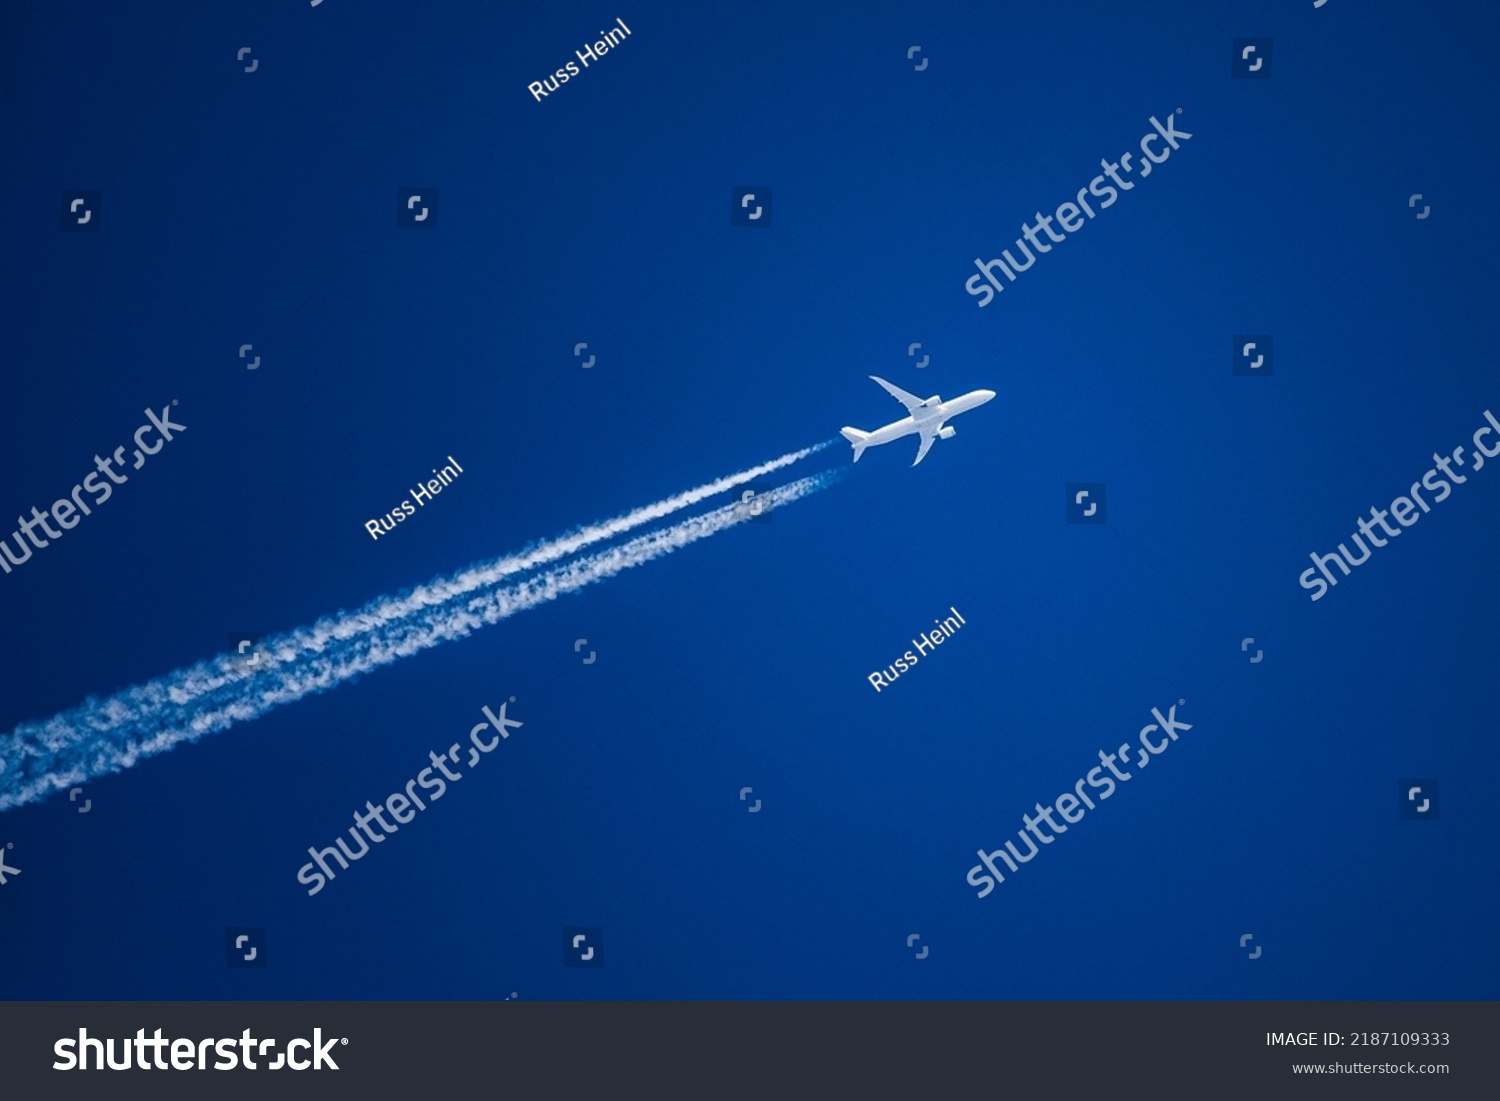 Sharp telephoto close-up of jet plane aircraft with contrails cruising from Tokyo to Boston, altitude AGL 37,000 feet, ground speed 548 knots. #2187109333